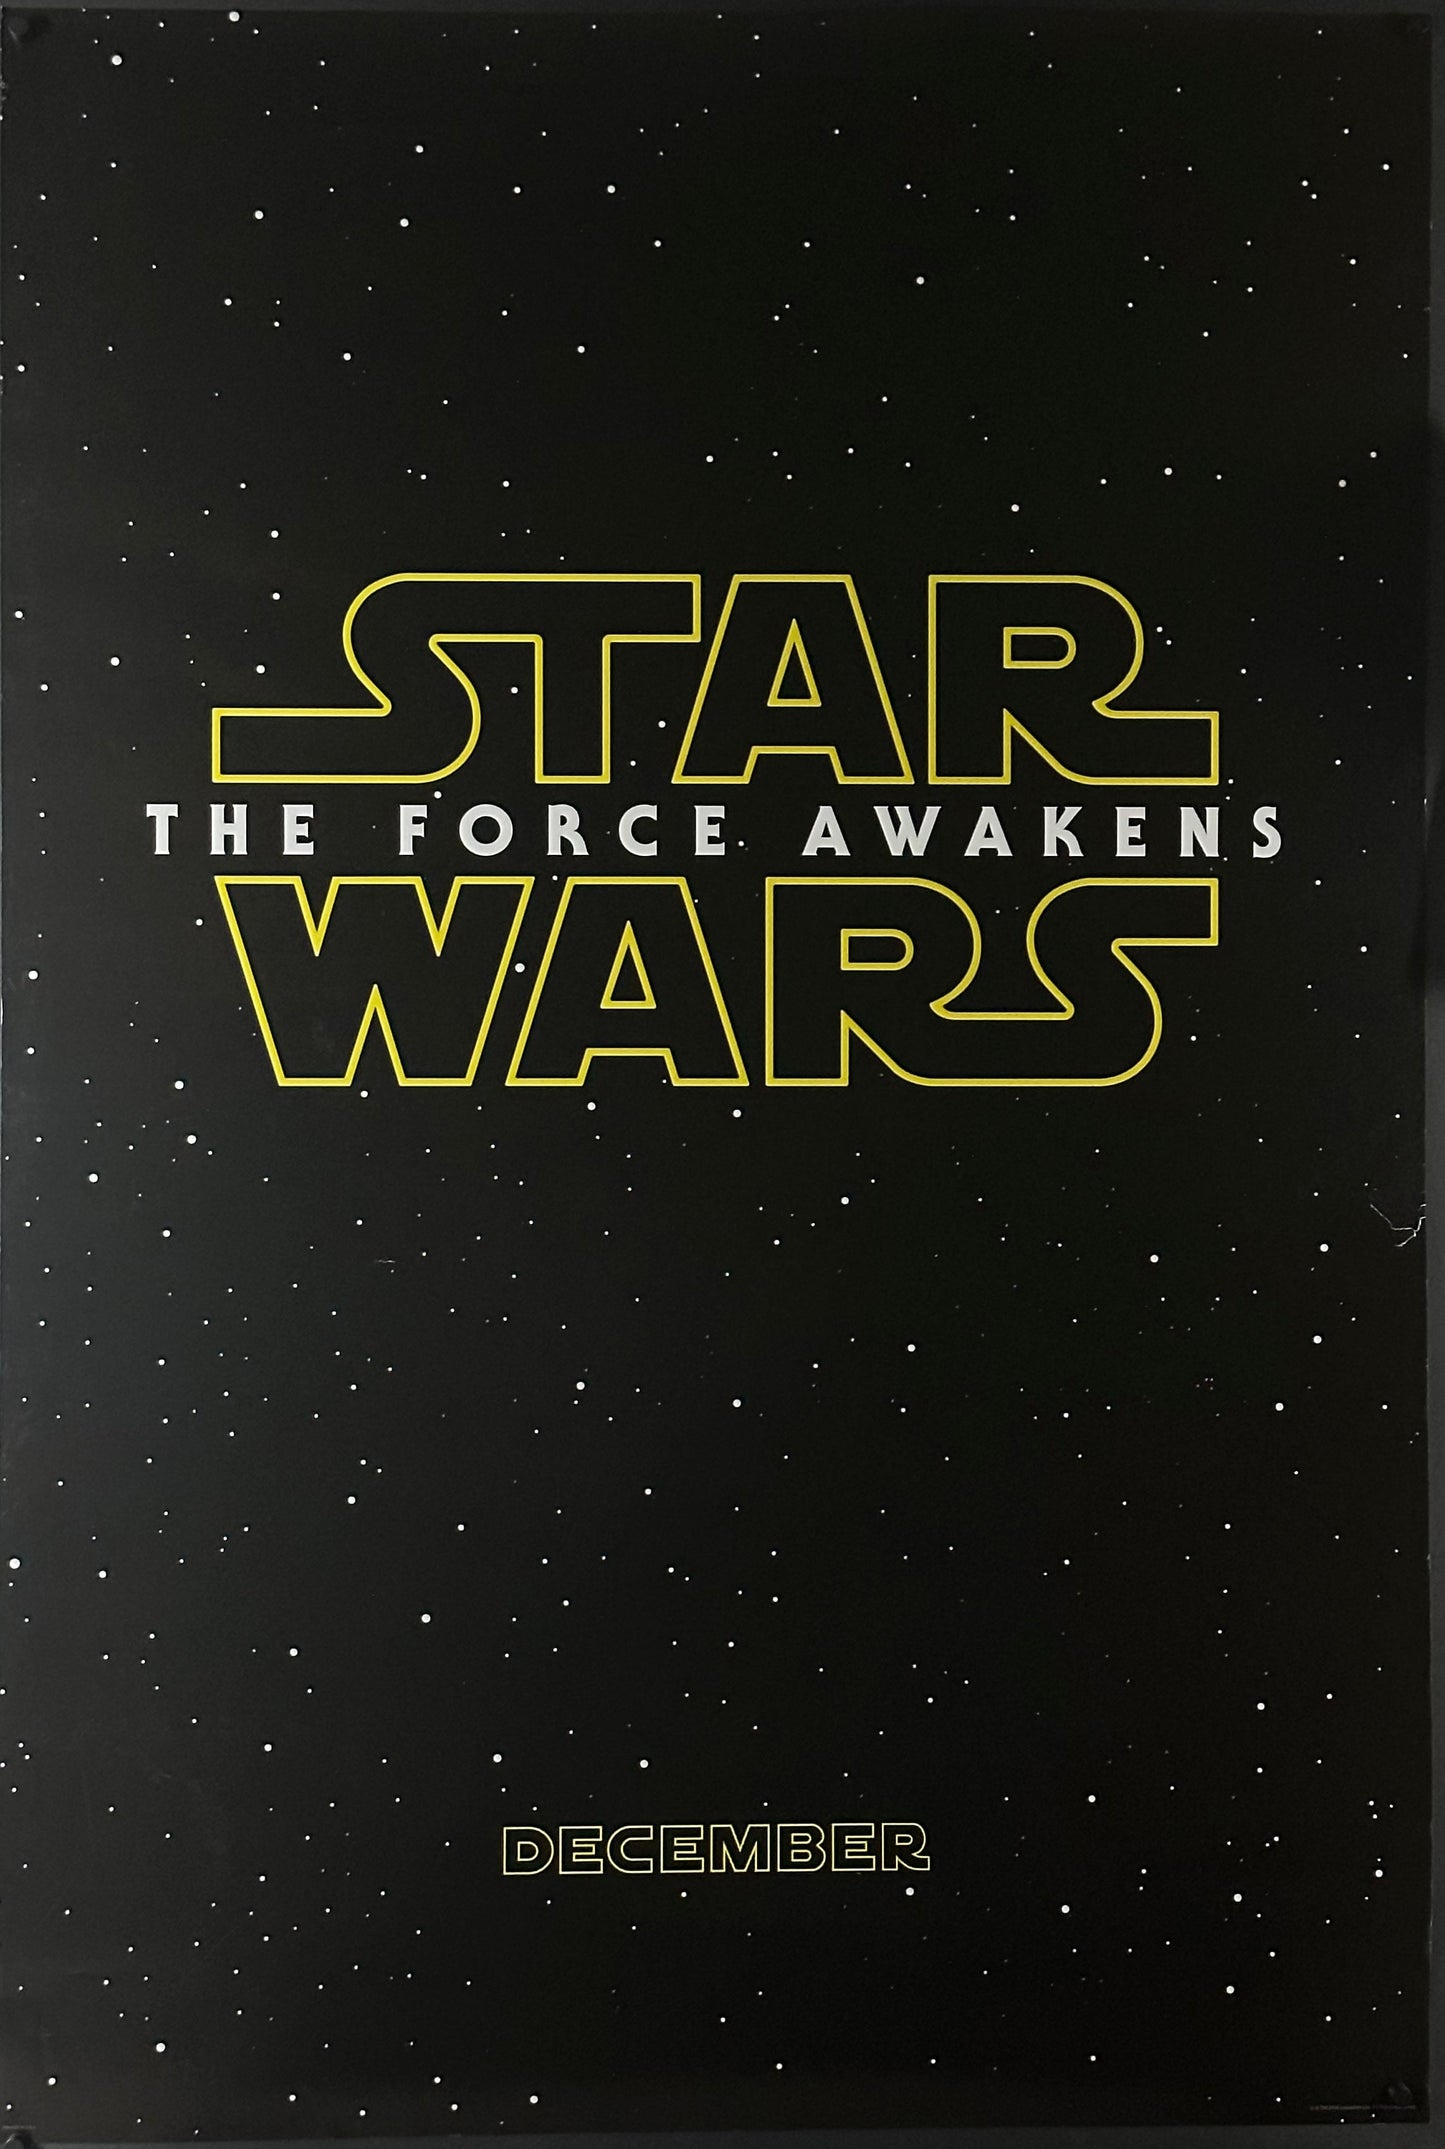 Star Wars: Episode VII - The Force Awakens US One Sheet Teaser Style (2015) - ORIGINAL RELEASE - posterpalace.com